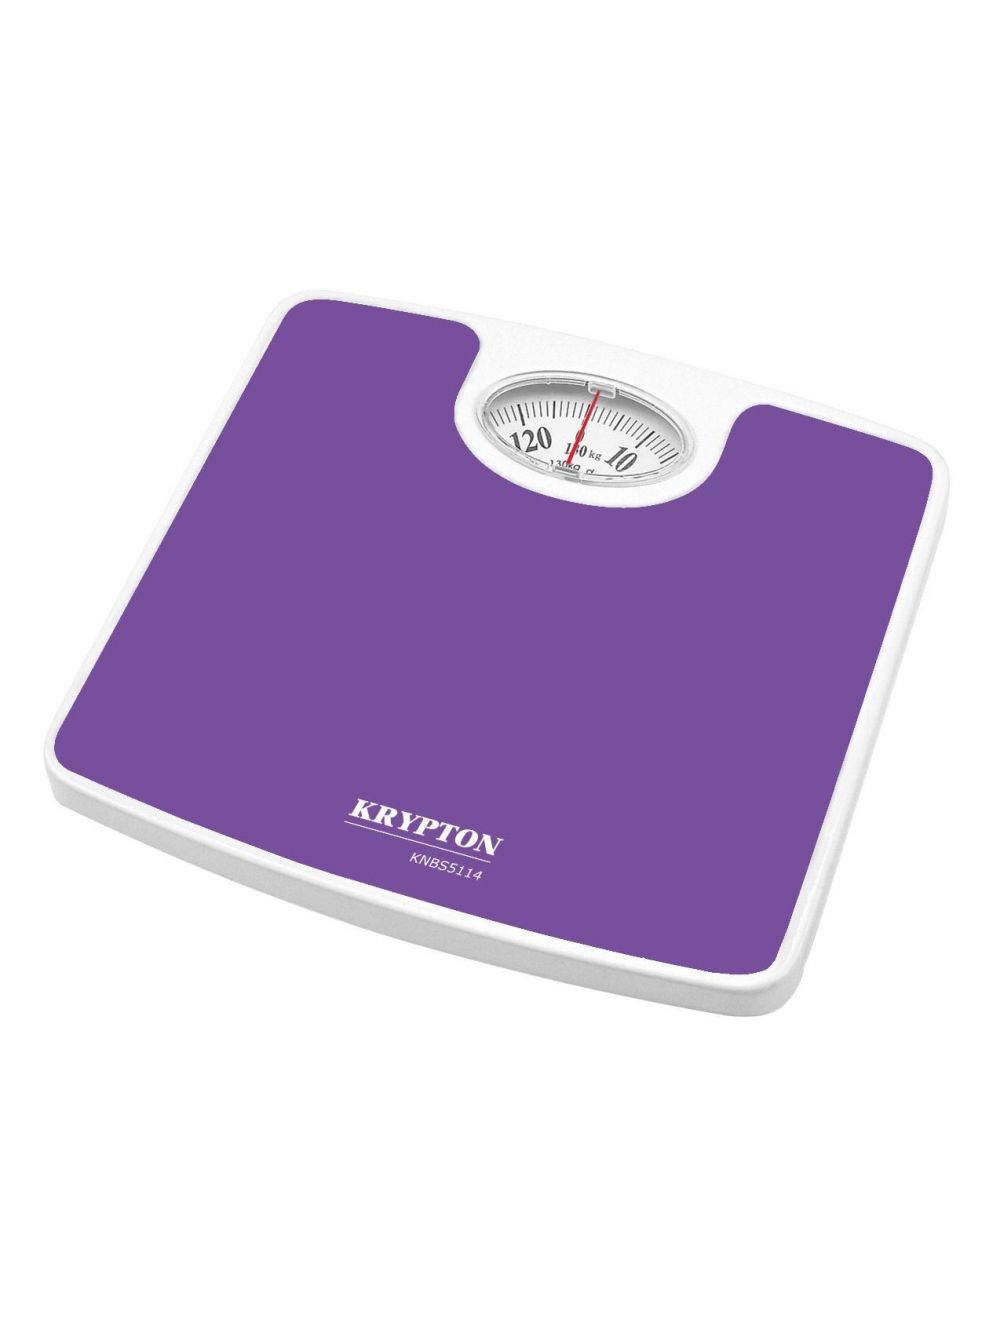 Mechanical Personal Body Weight Weighing Scale -KNBS5114